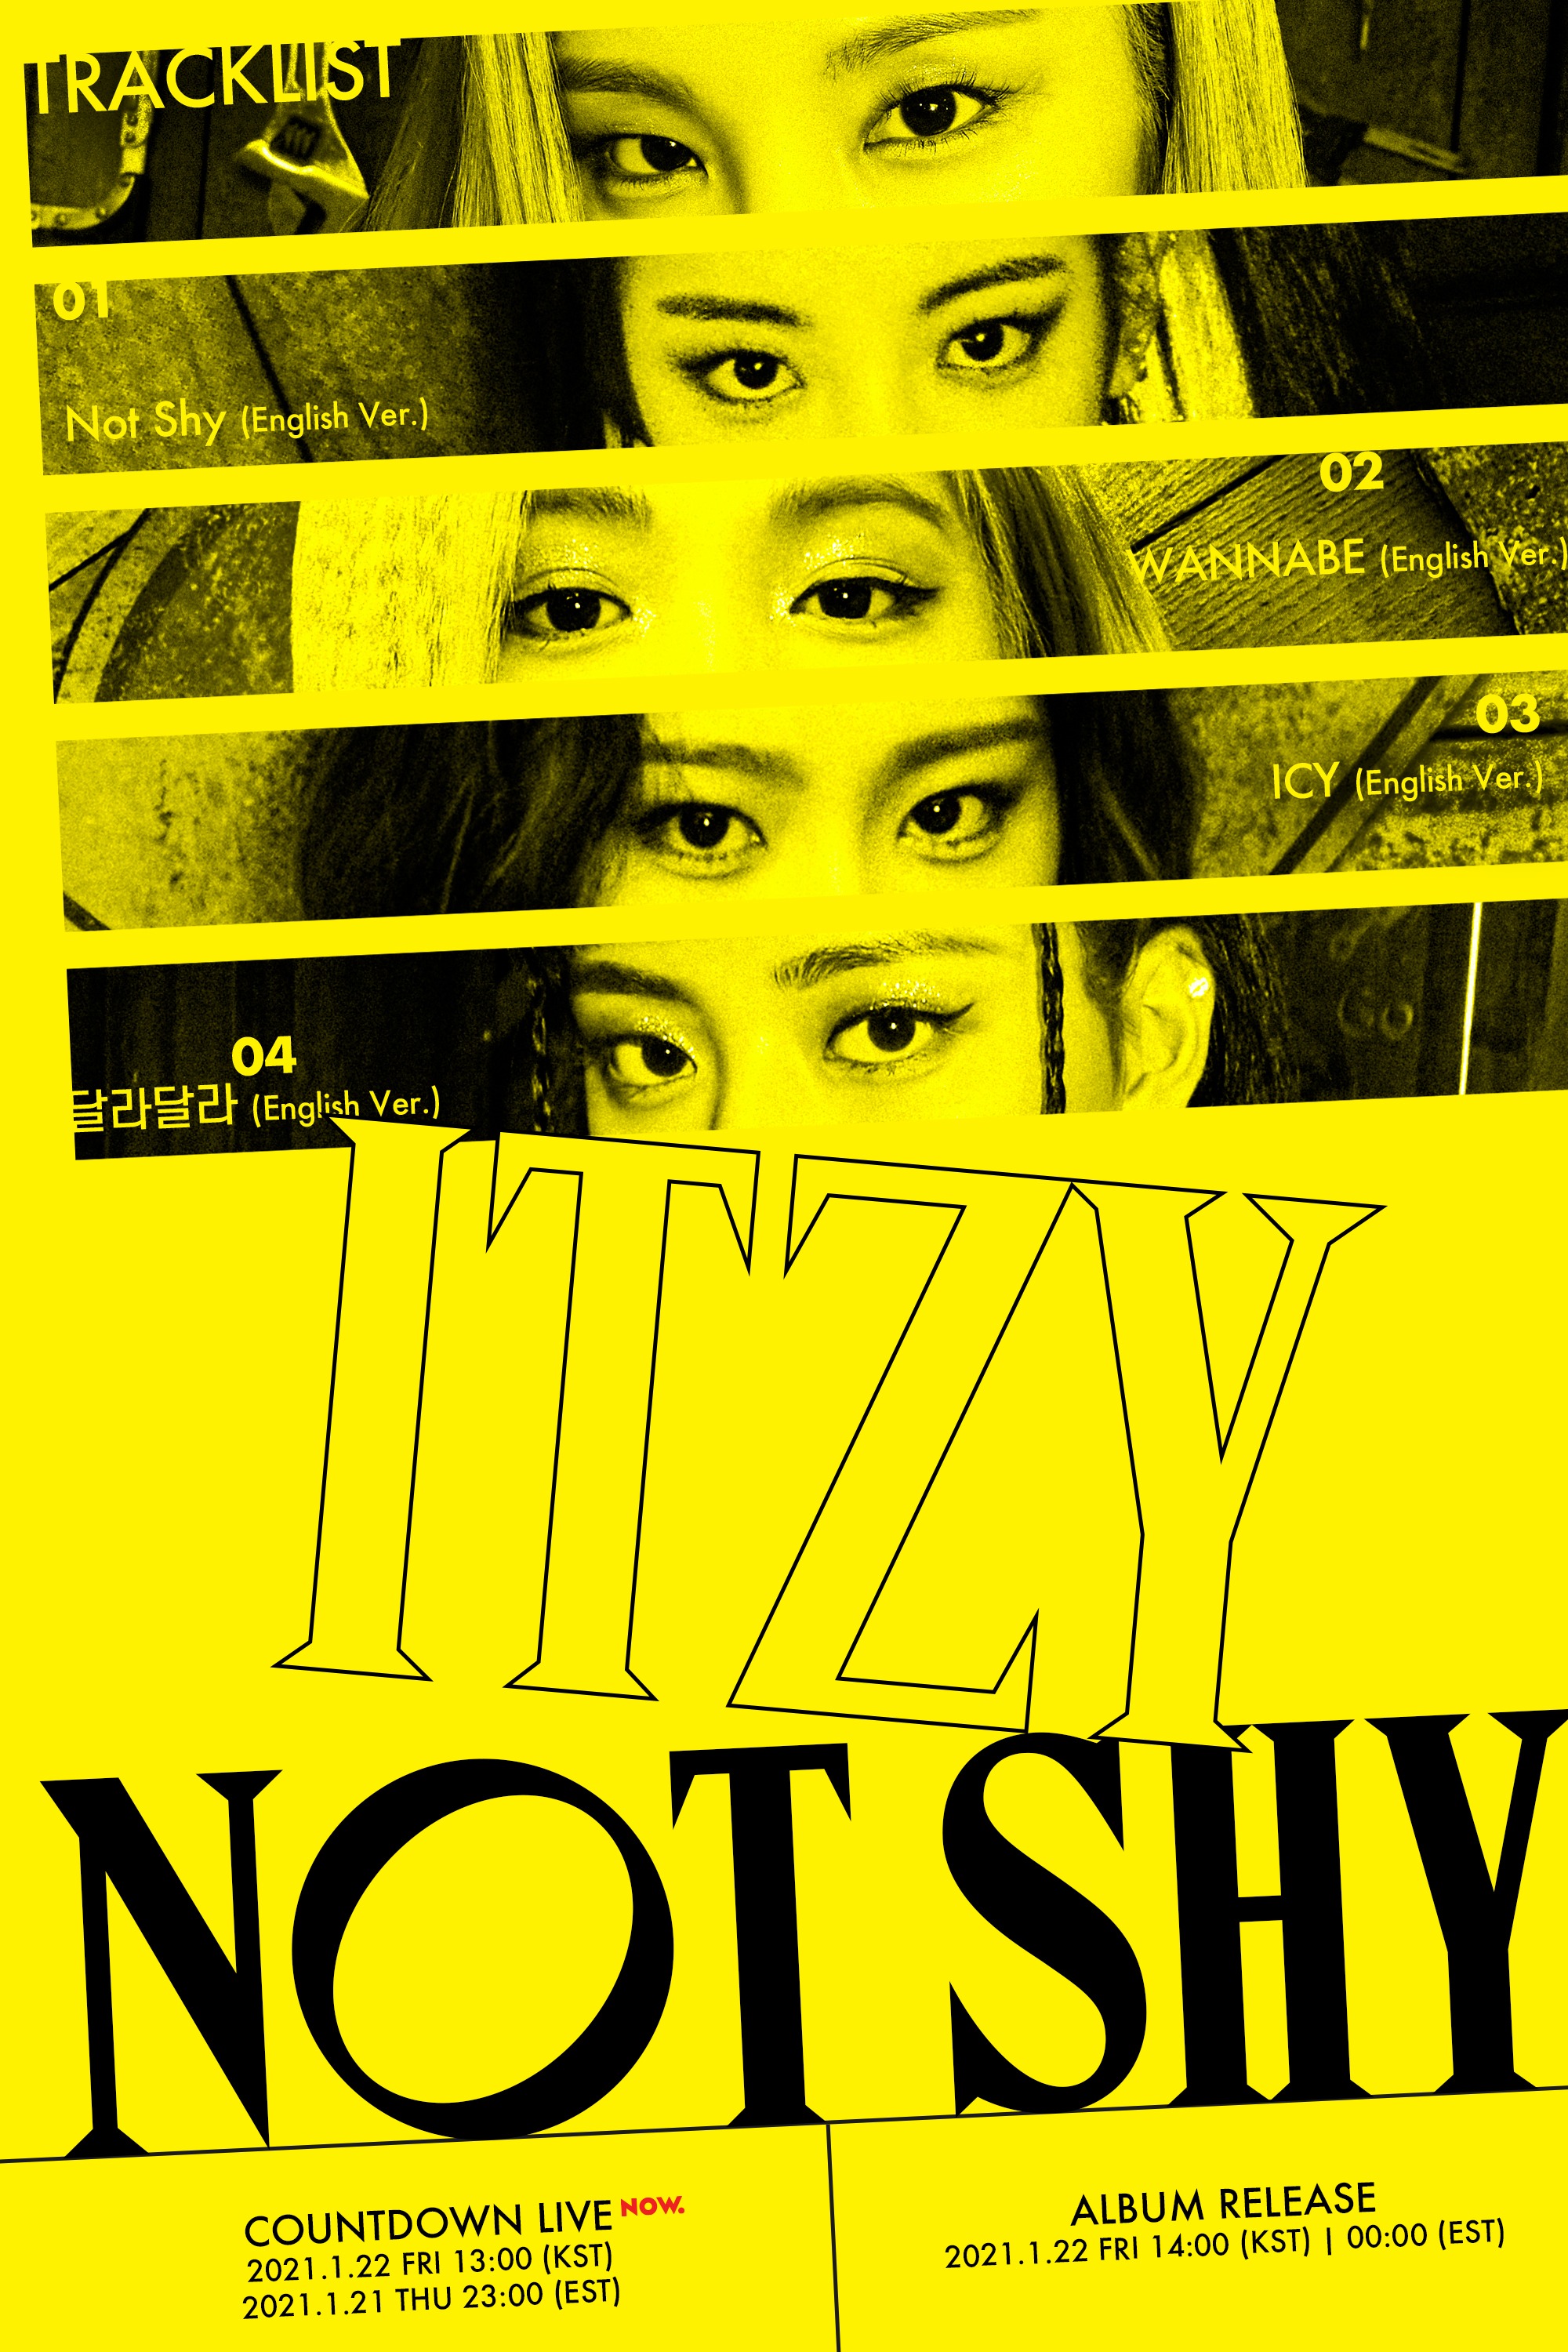 itzy-announces-release-of-first-english-album-not-shy-on-january-22